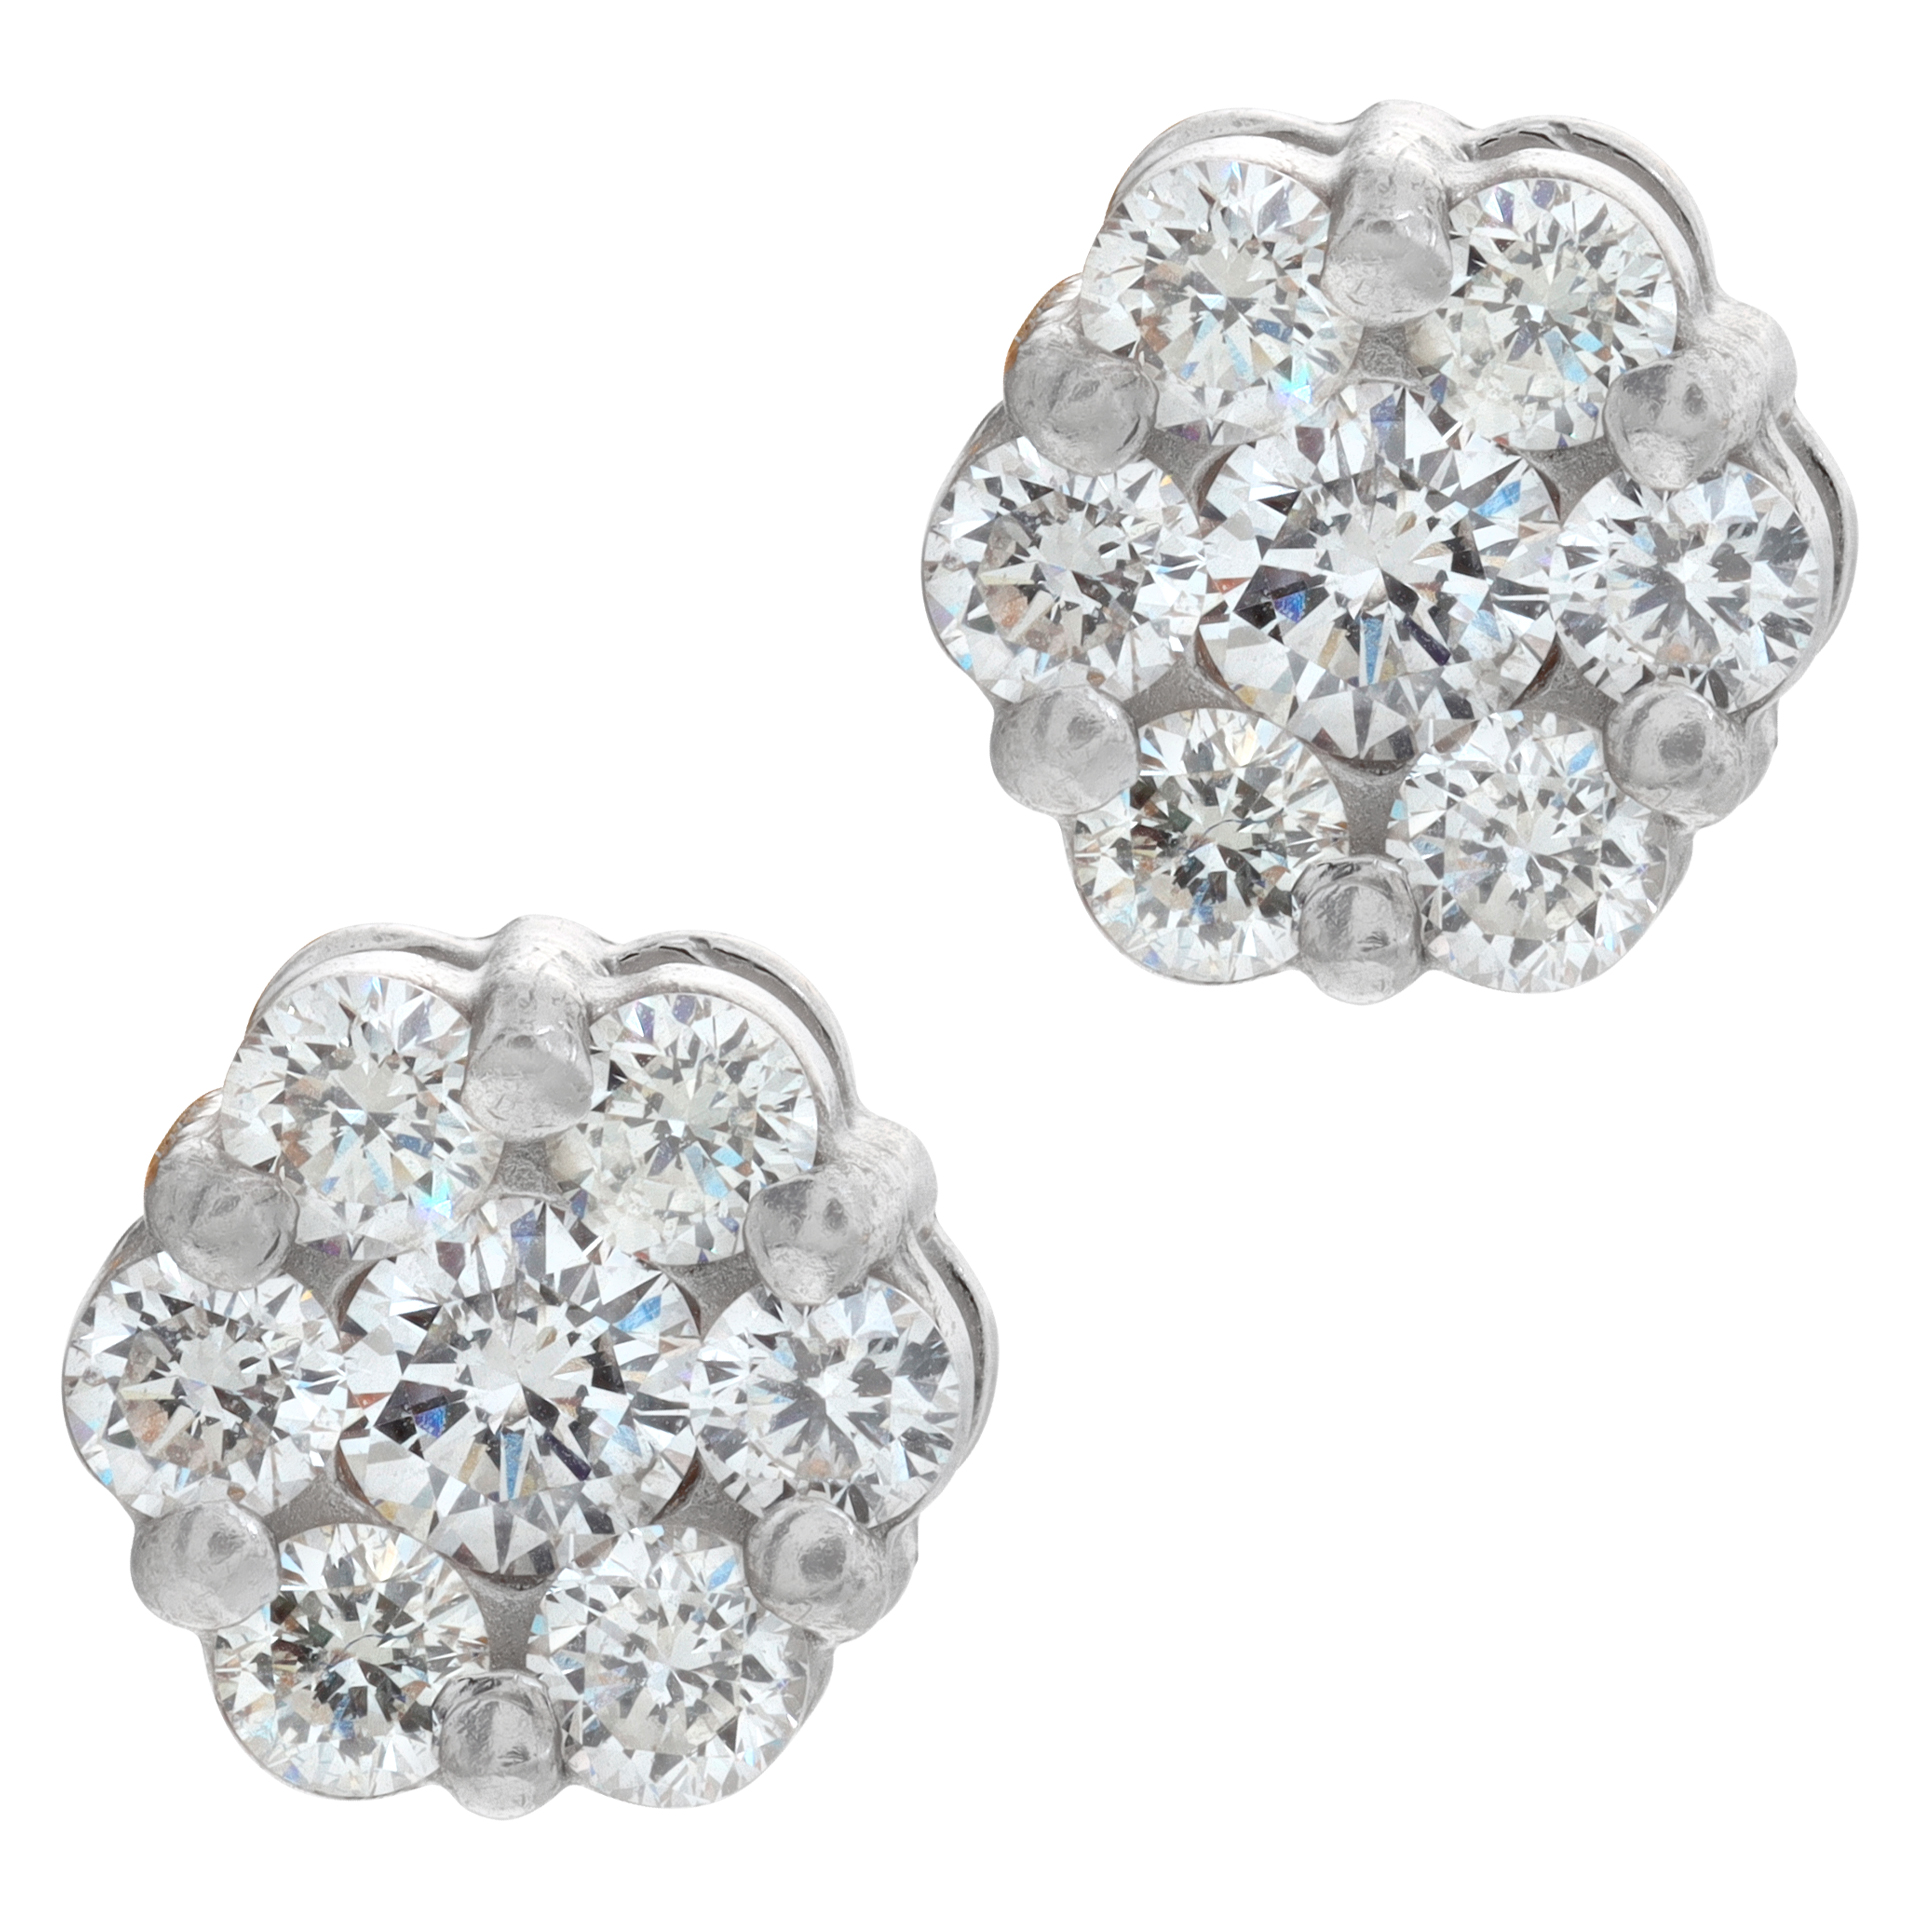 Flower set diamond earrings in 14k with approx 0.60 cts of G-H color